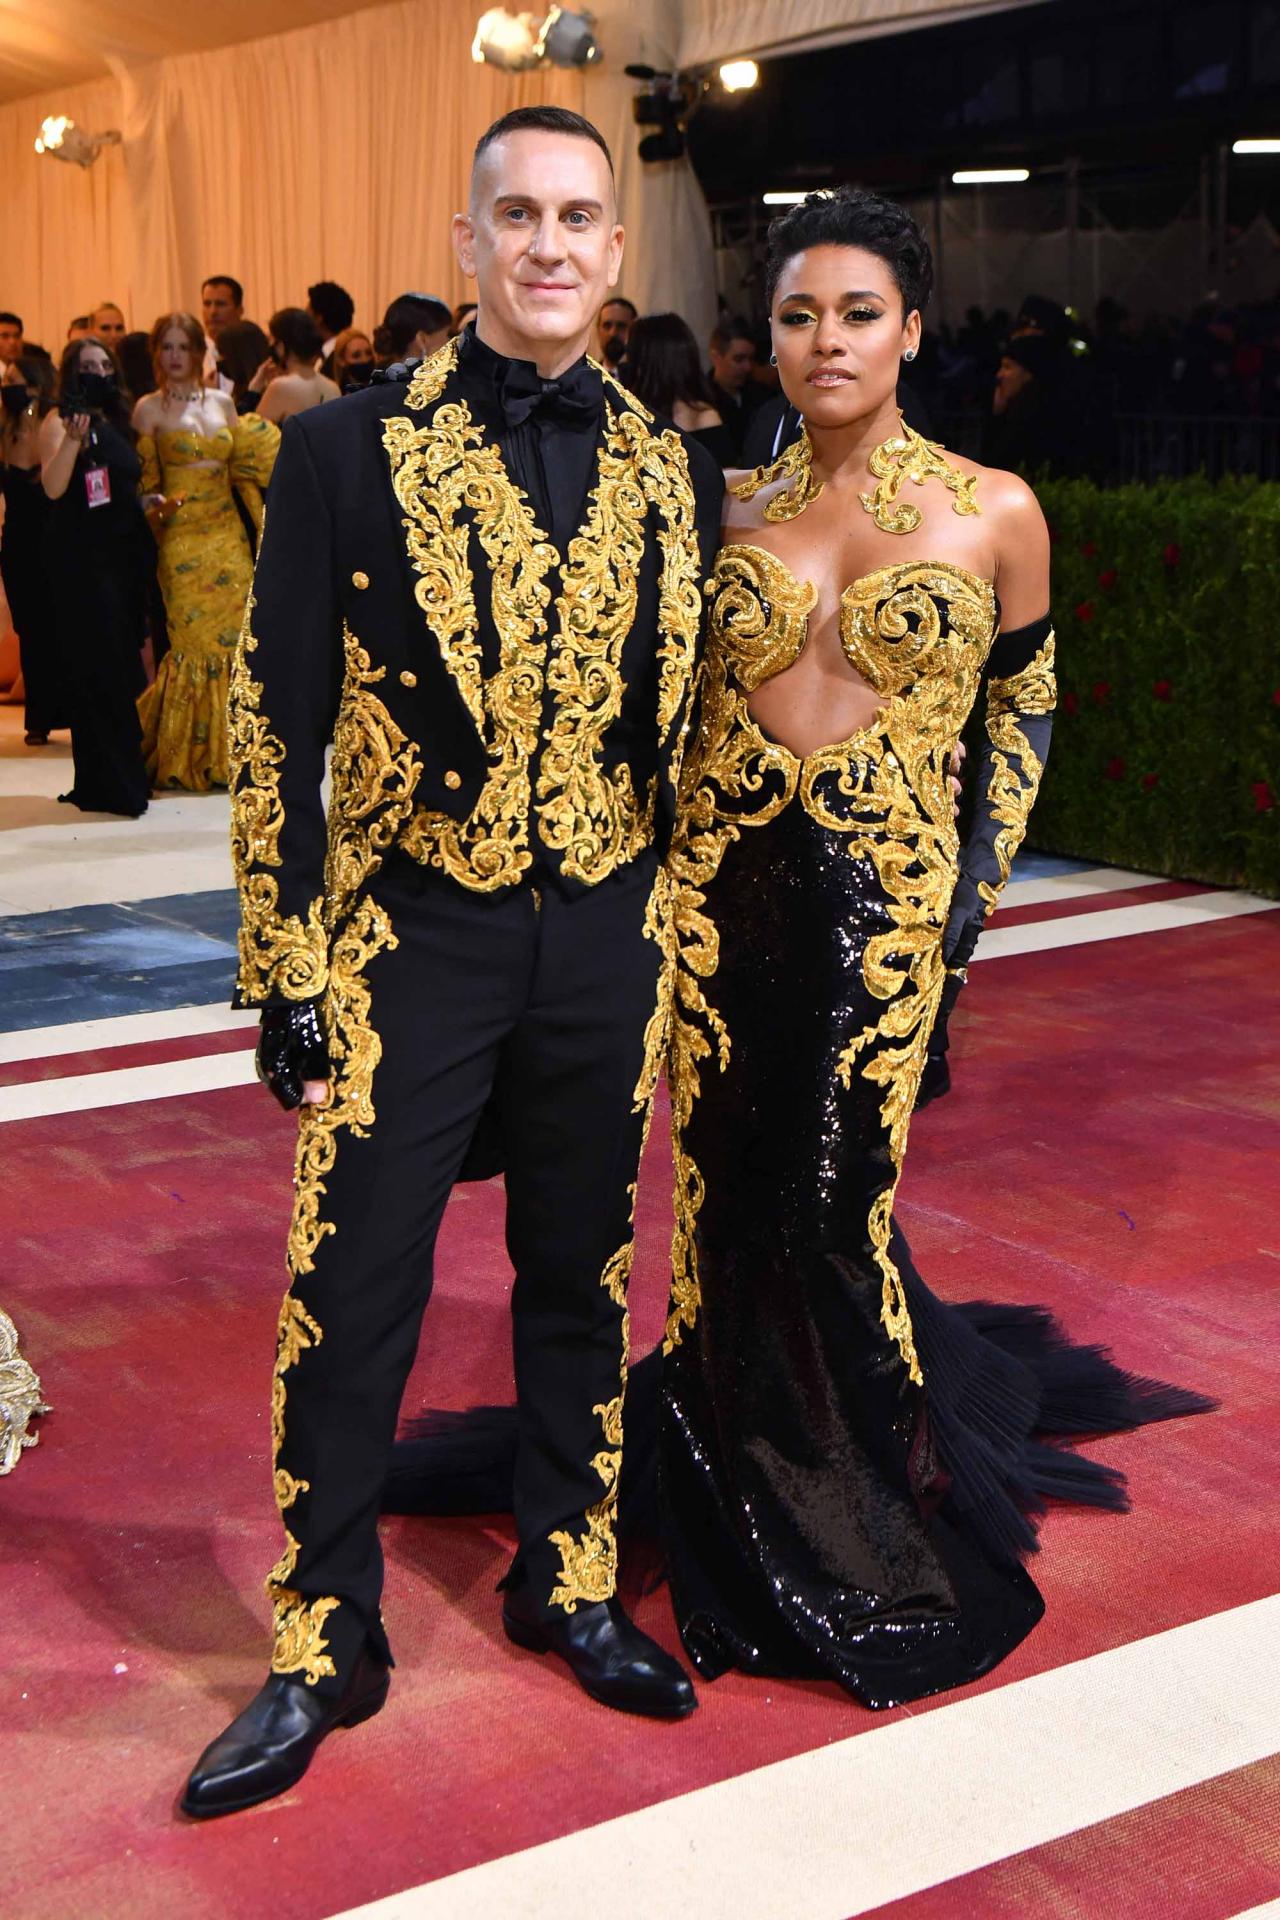 Actress Ariana DeBose and fashion designer Jeremy Scott arrive for the 2022 Met Gala at the Metropolitan Museum of Art on May 2, 2022, in New York. - The Gala raises money for the Metropolitan Museum of Art's Costume Institute. The Gala's 2022 theme is "In America: An Anthology of Fashion". (Photo by ANGELA  WEISS / AFP)